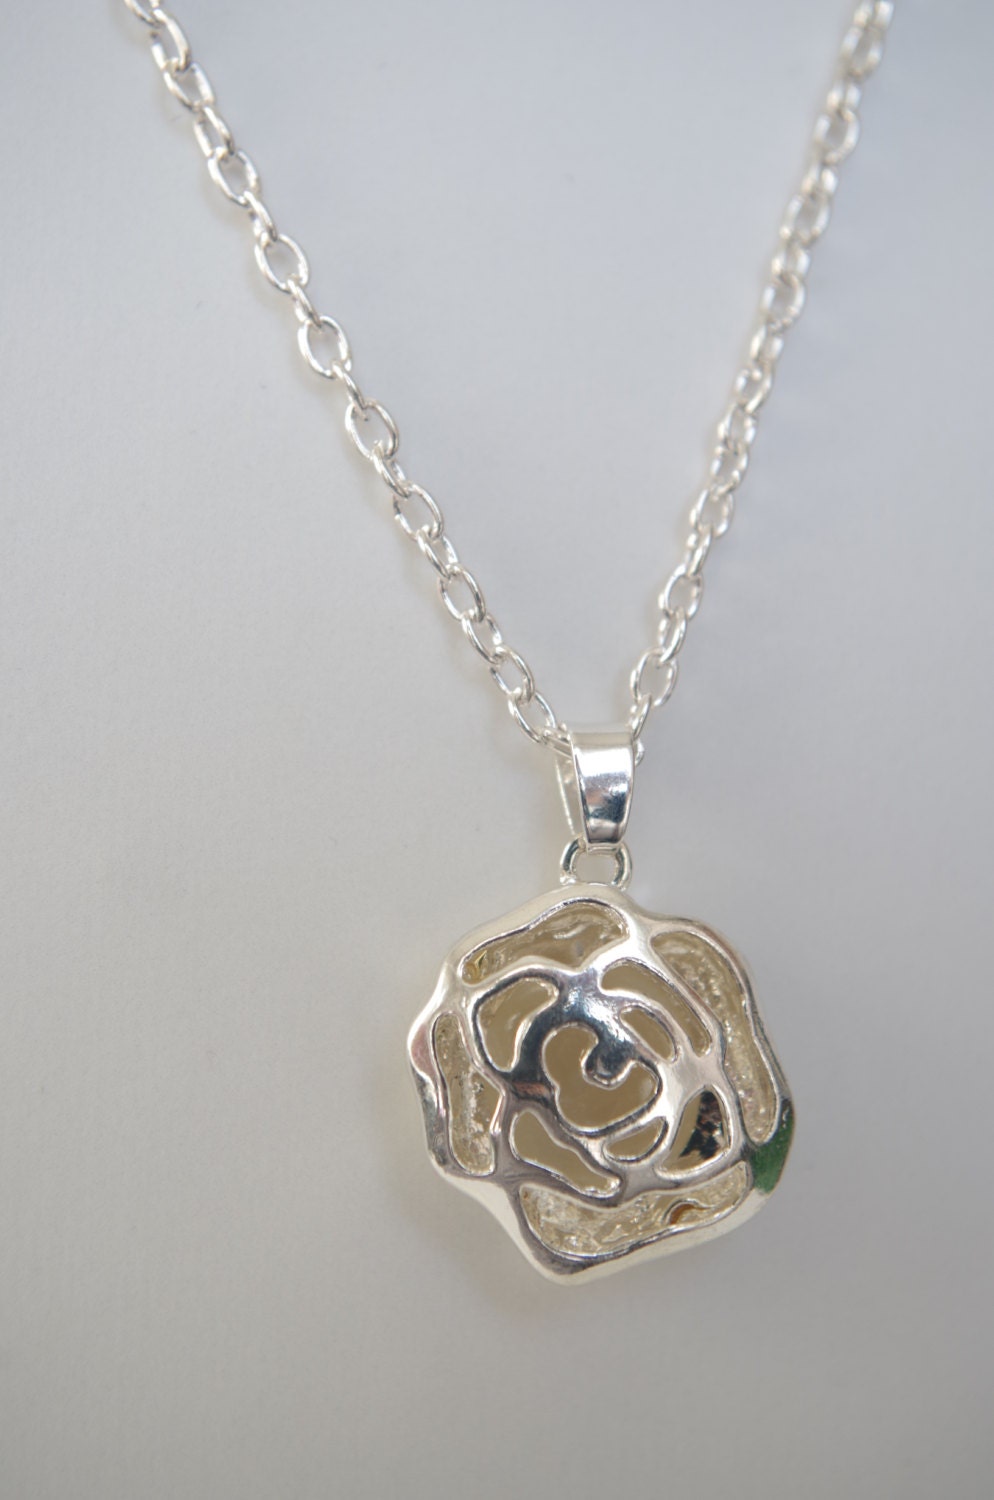 Glowing Rose Necklace Glow in the Dark Jewelry Silver Rose Aqua Glowing Necklace Mothers day gifts for  Her Women jewelry